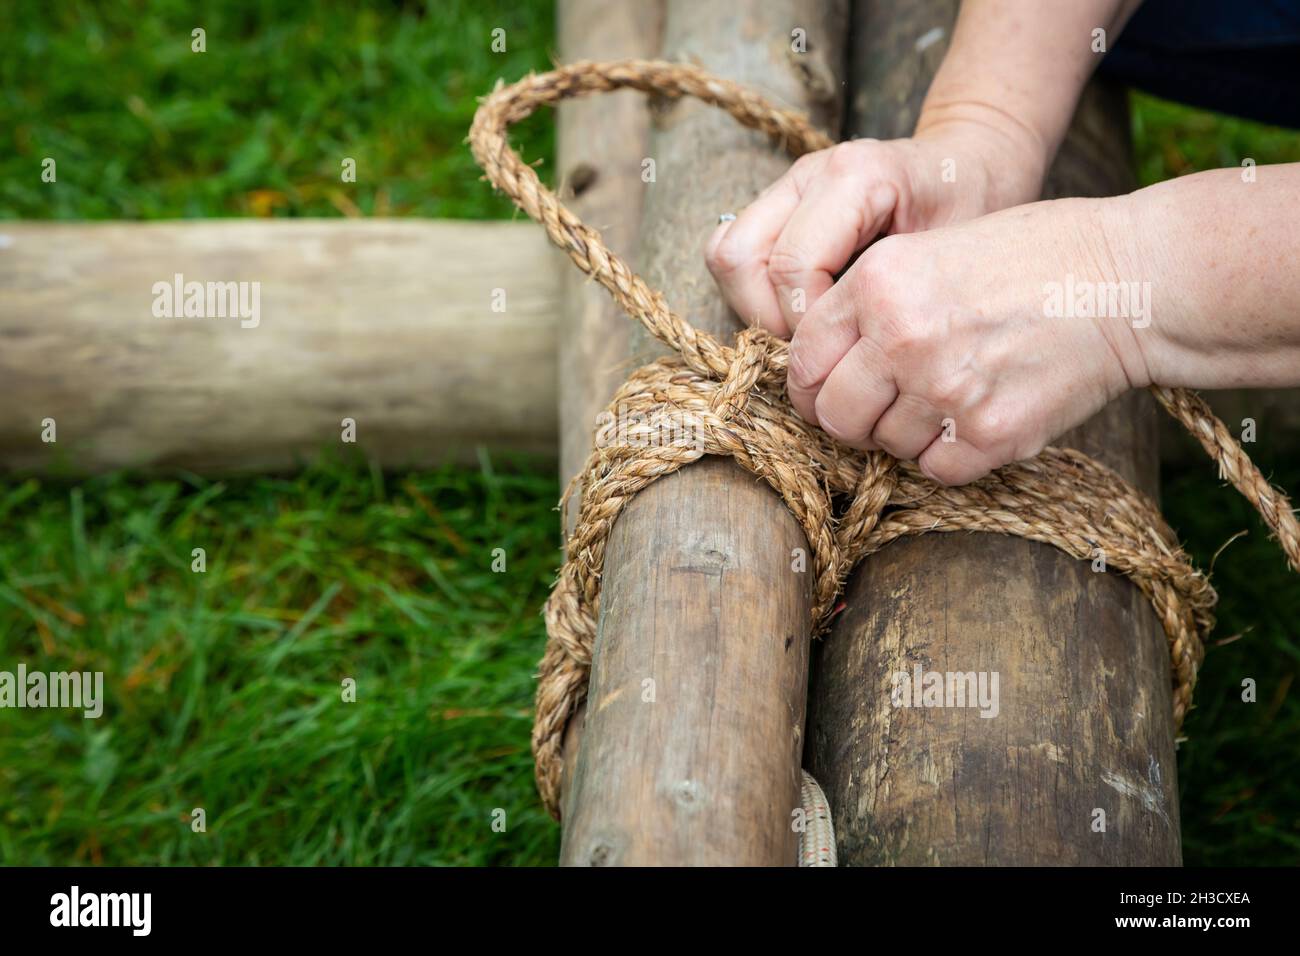 Camping, Survival skills, Fire, cooking, orienteering, ropes knots, making kindling Stock Photo